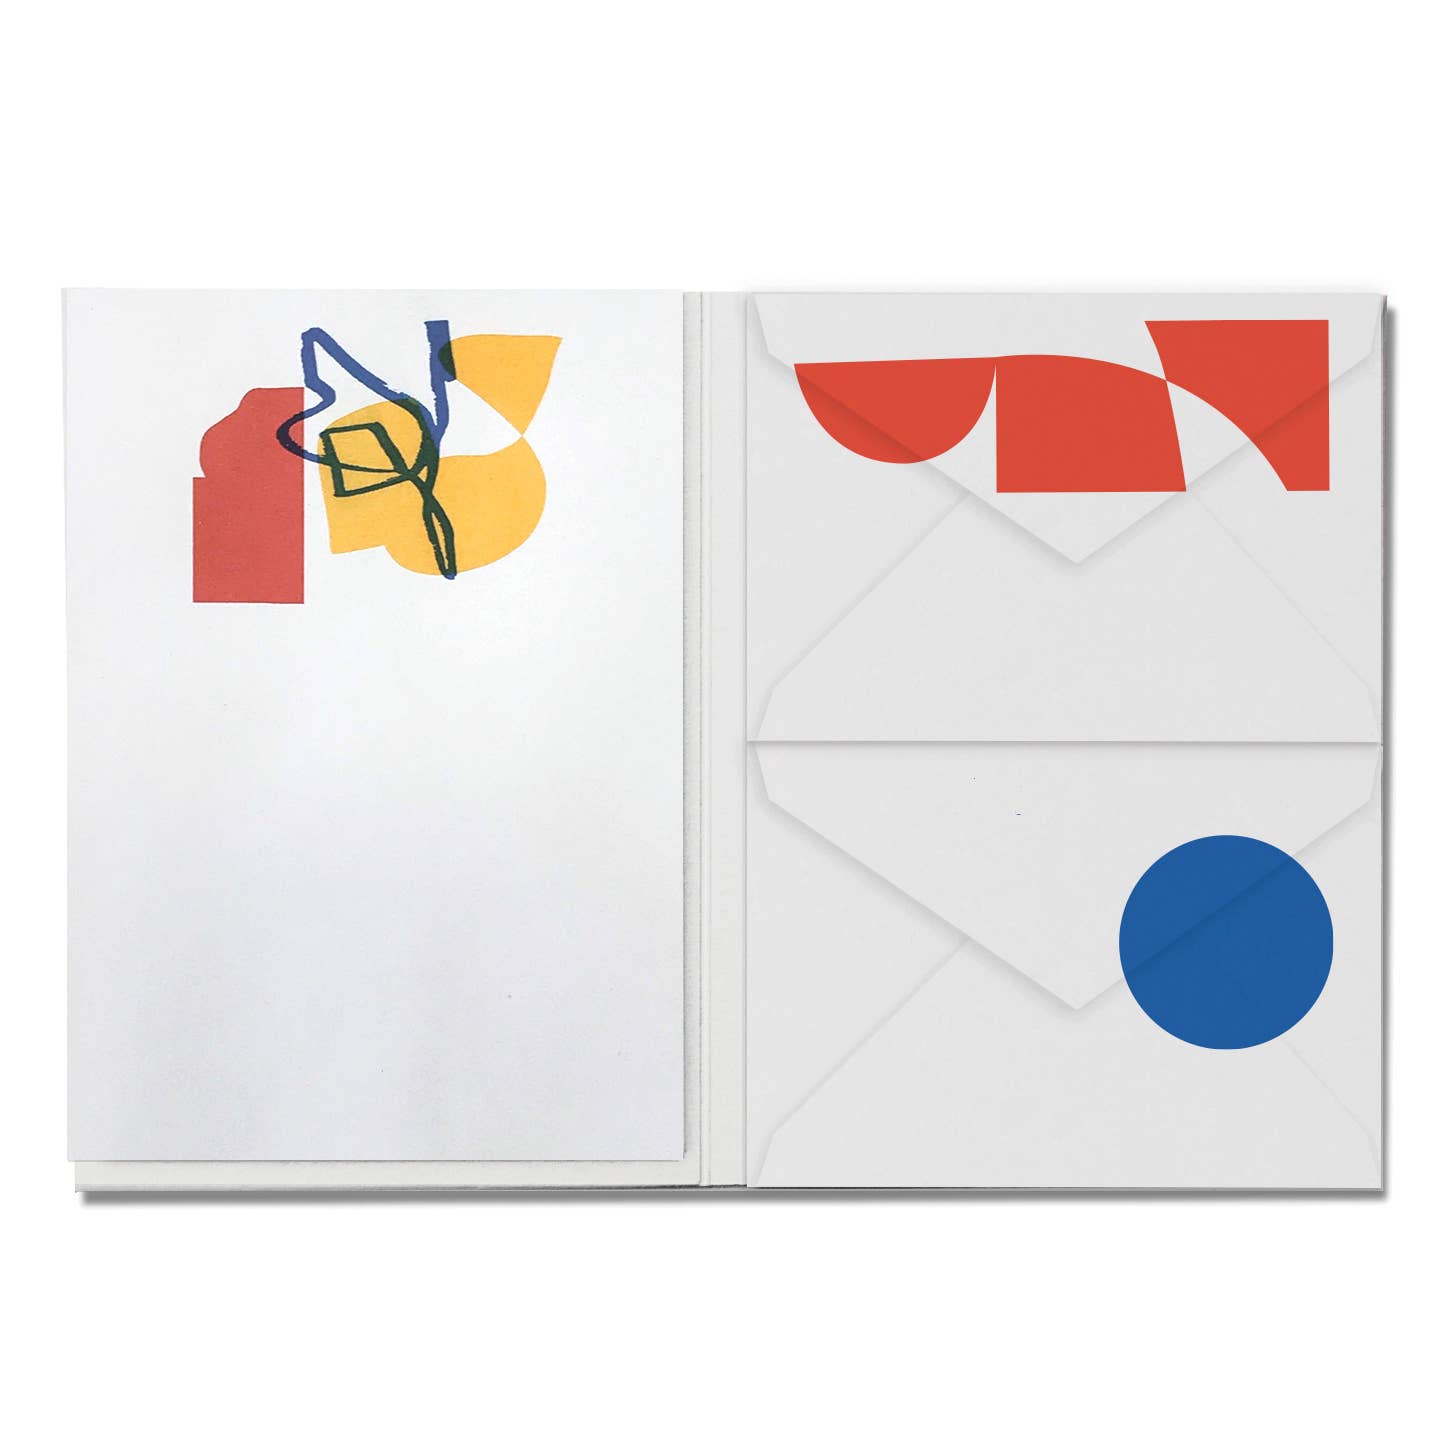 Letterquette Stationery Set, Rby